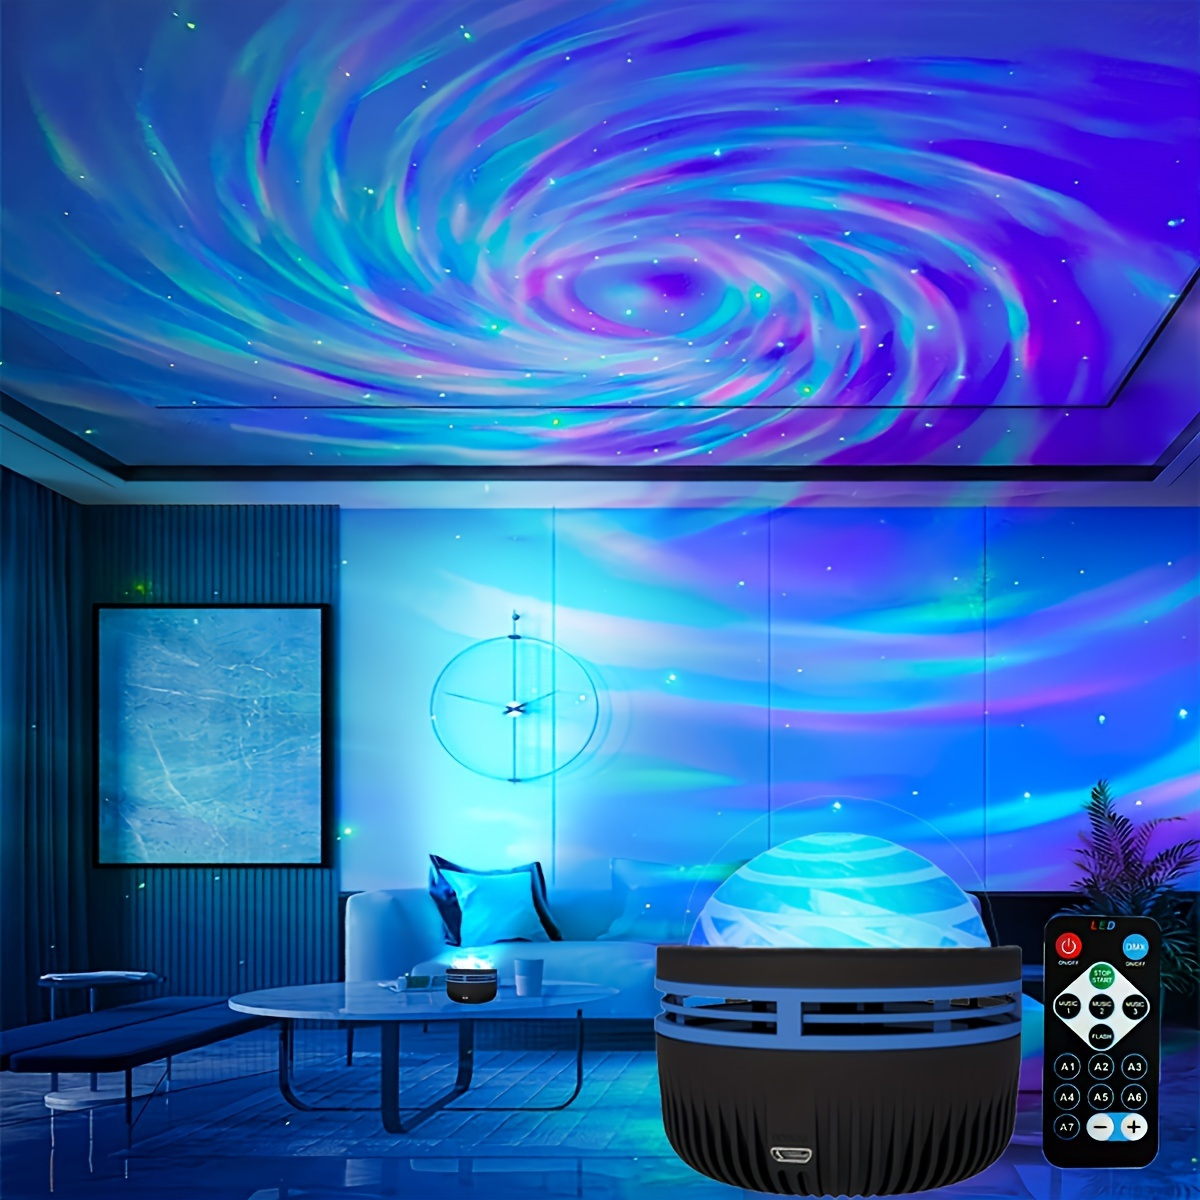 Galaxy Projector for Bedroom, Bluetooth Speaker Star Projectors Dinosaur  Egg Galaxy Night Light with 19 White Noise, Remote, Timer, Aurora Projector  for Kids Gaming Room, Home Theater, Ceiling Decor 